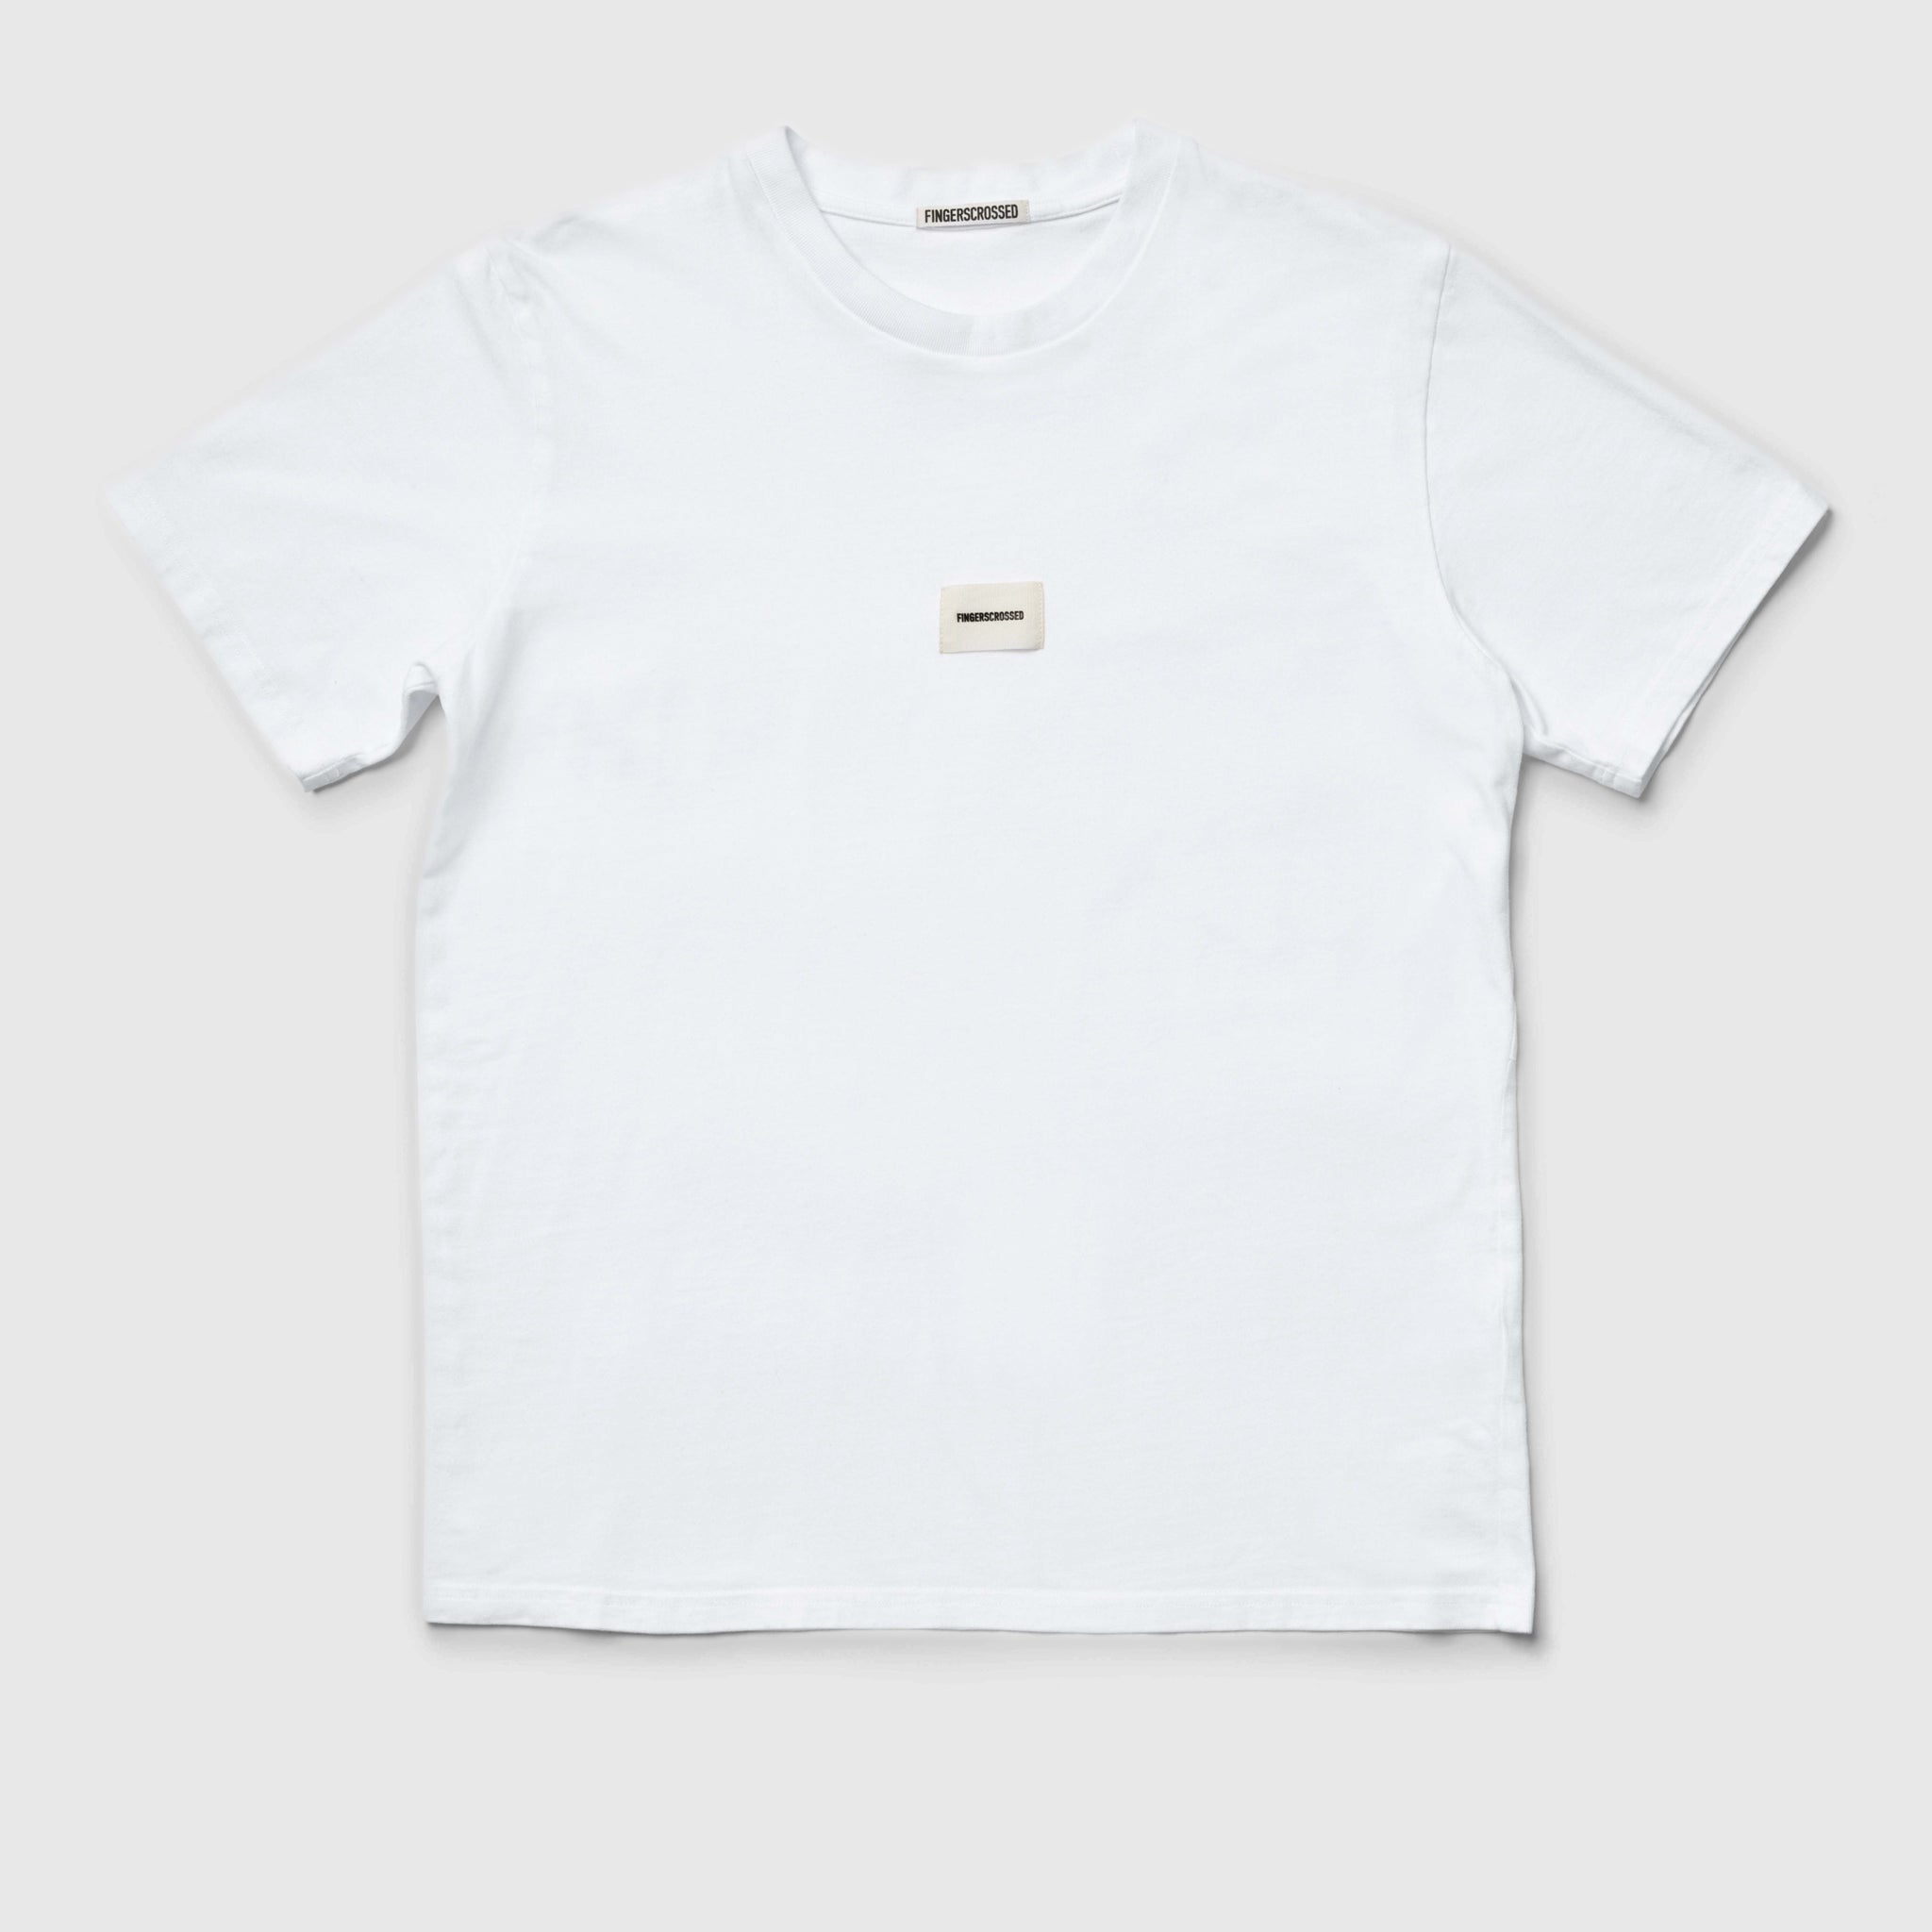 Movement Tee - Collage White